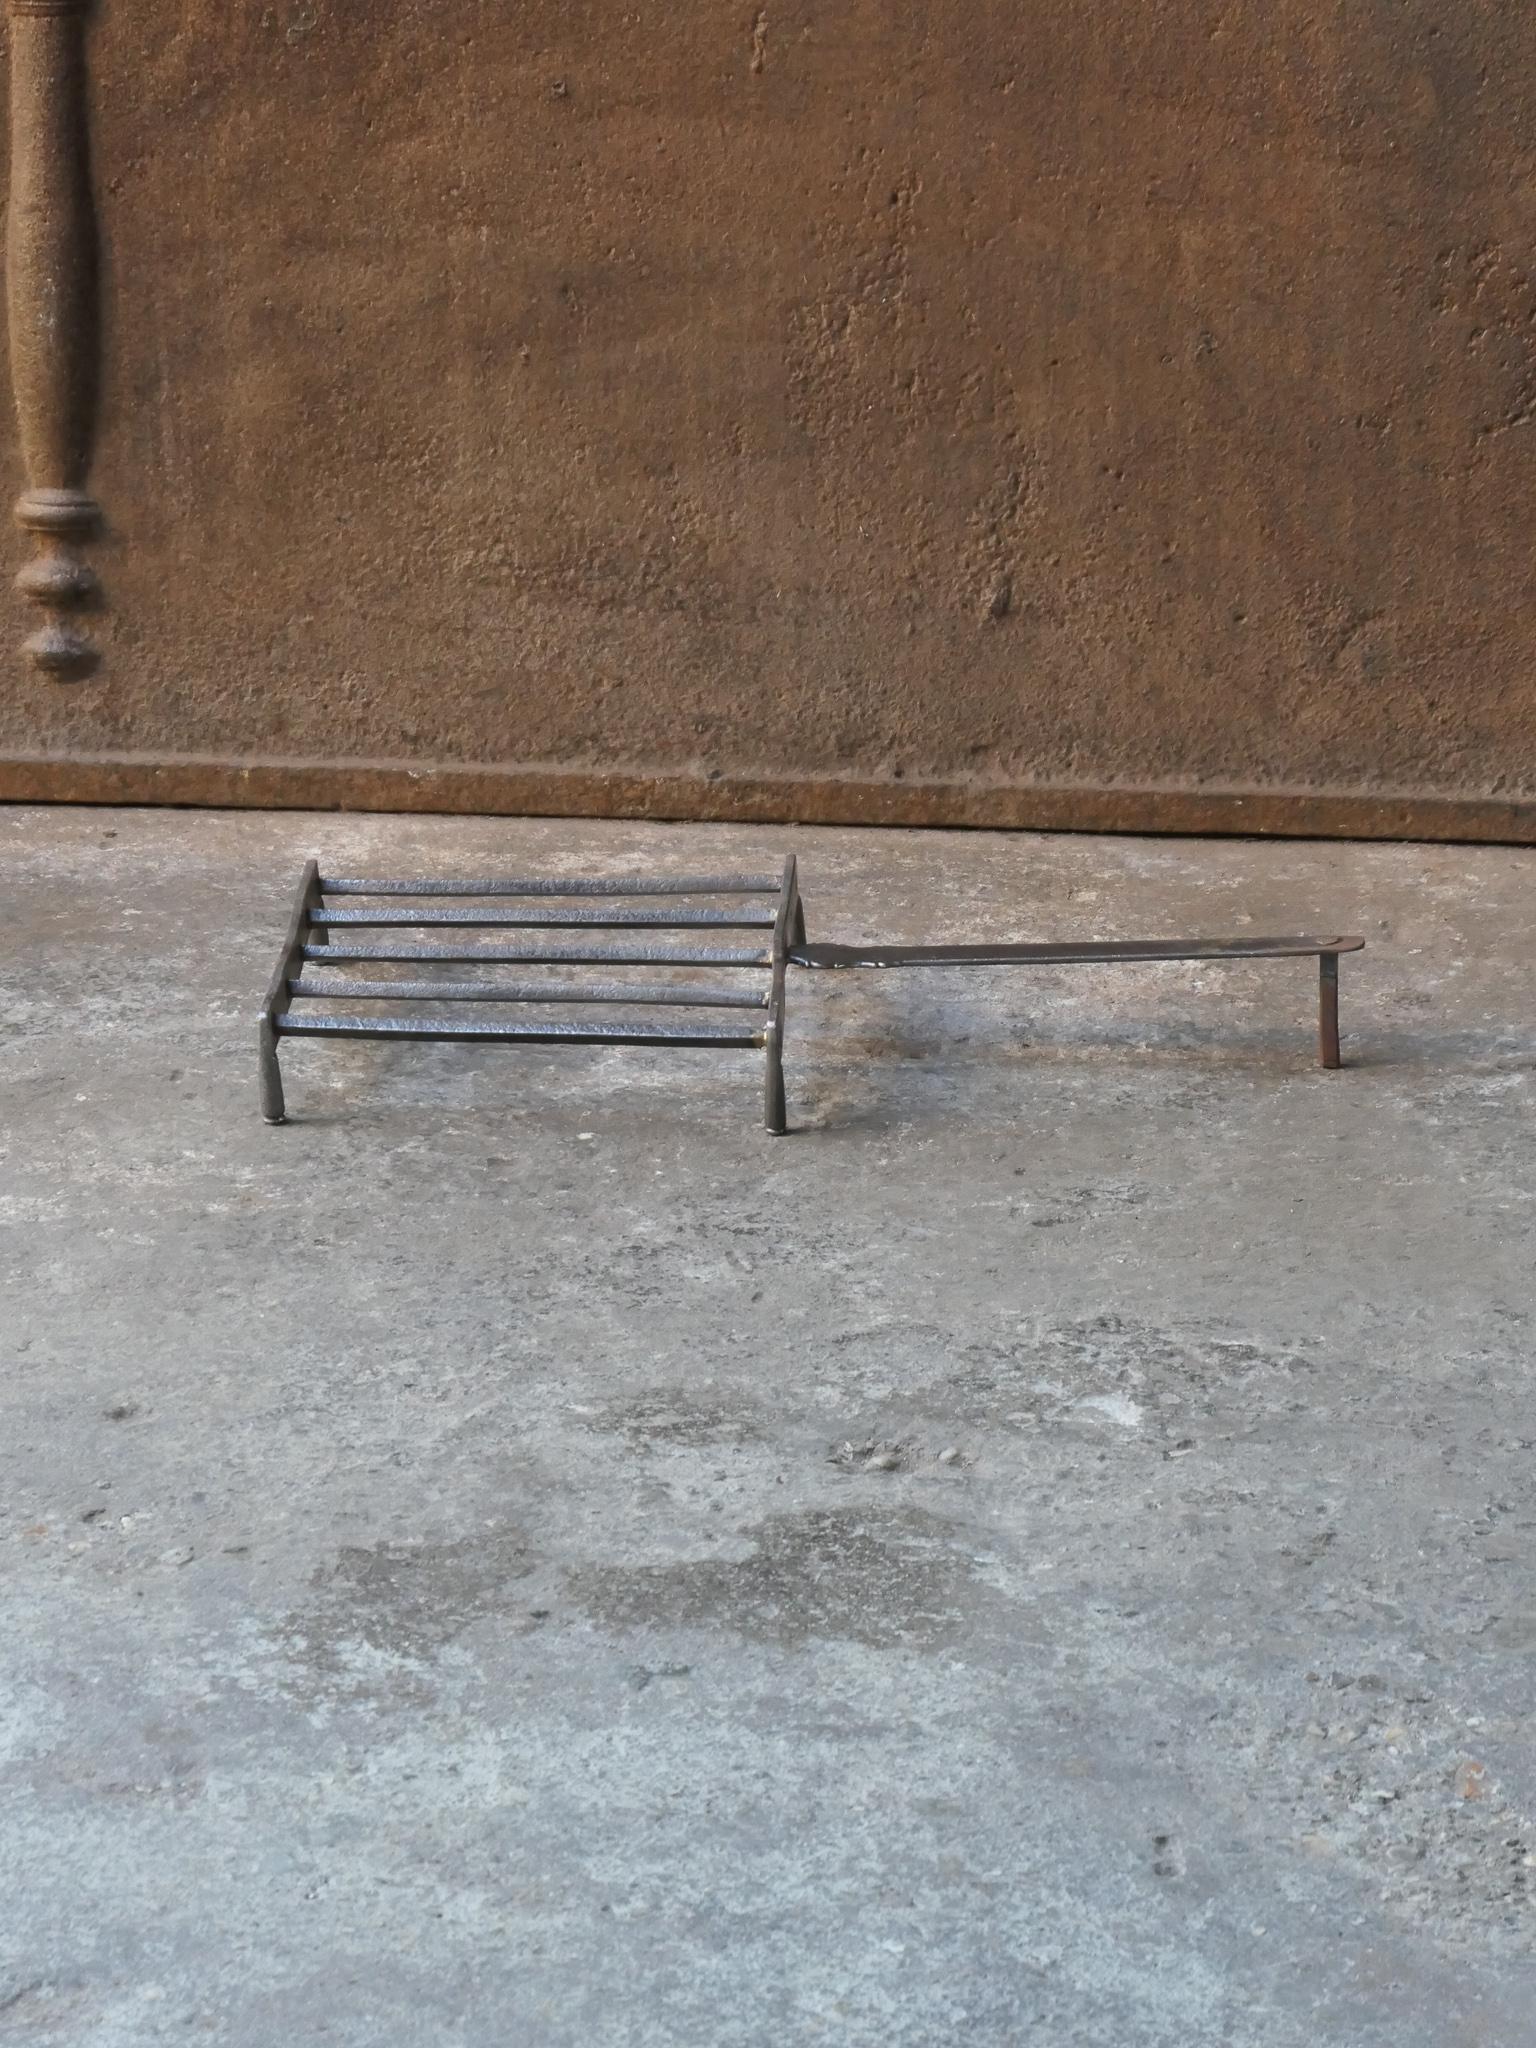 19th Century hand forged French gridiron, made of wrought iron. It is used to grill small pieces of meat quickly over the fire. Sometimes they are put in the fire or else on a trivet, depending on the size of the fire. The gridiron is in a good